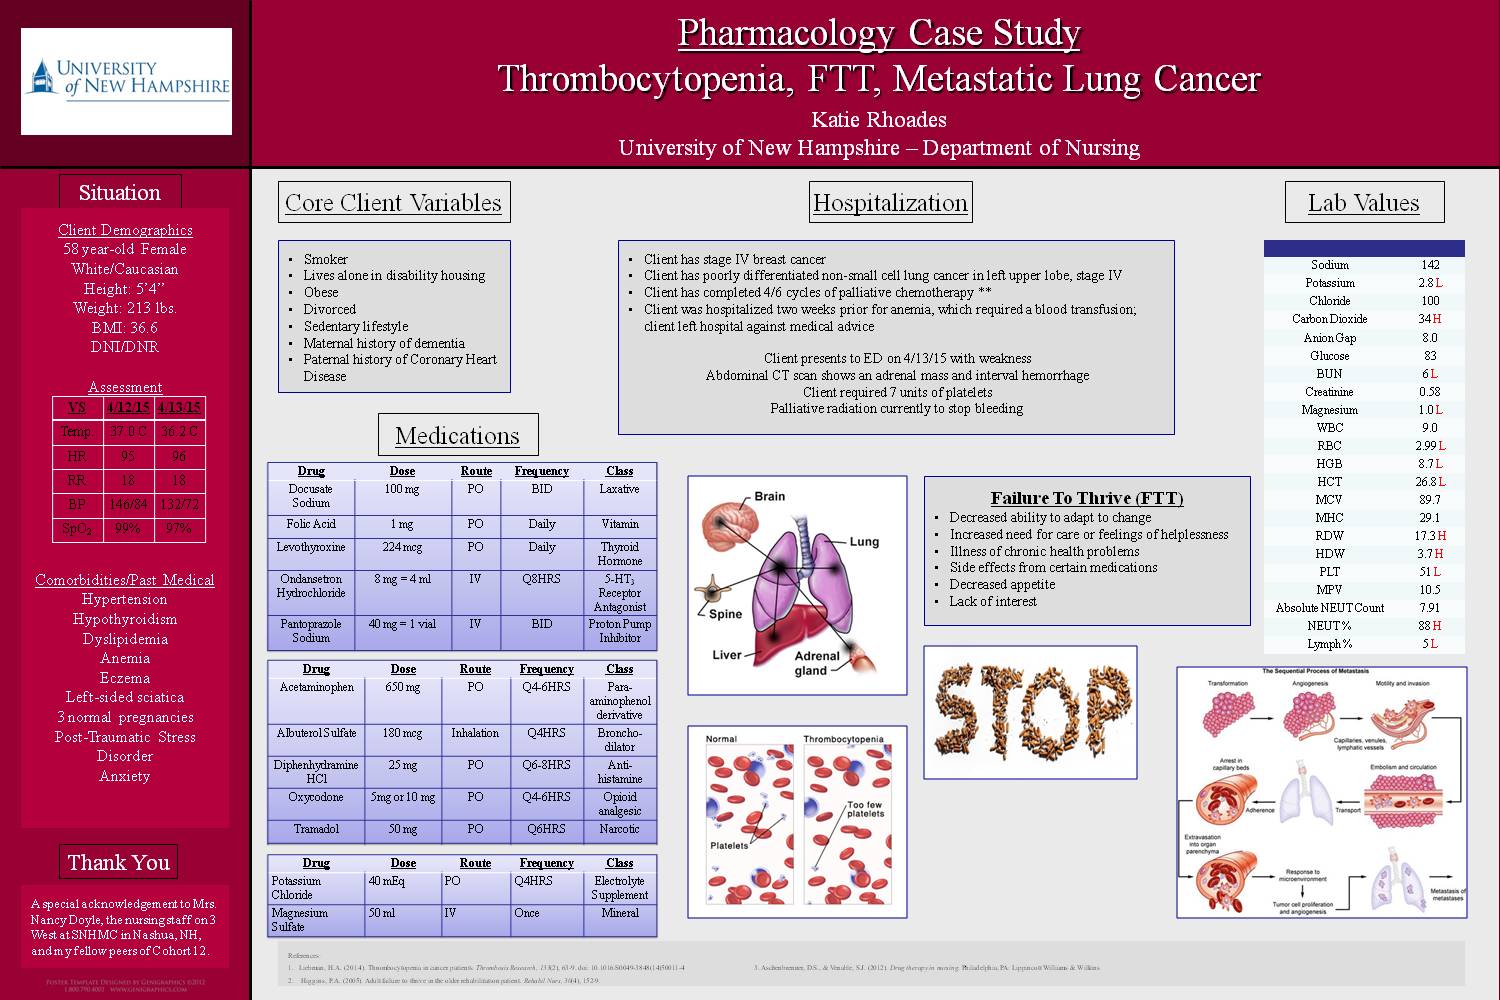 Pharmacology Case Study by rhoades